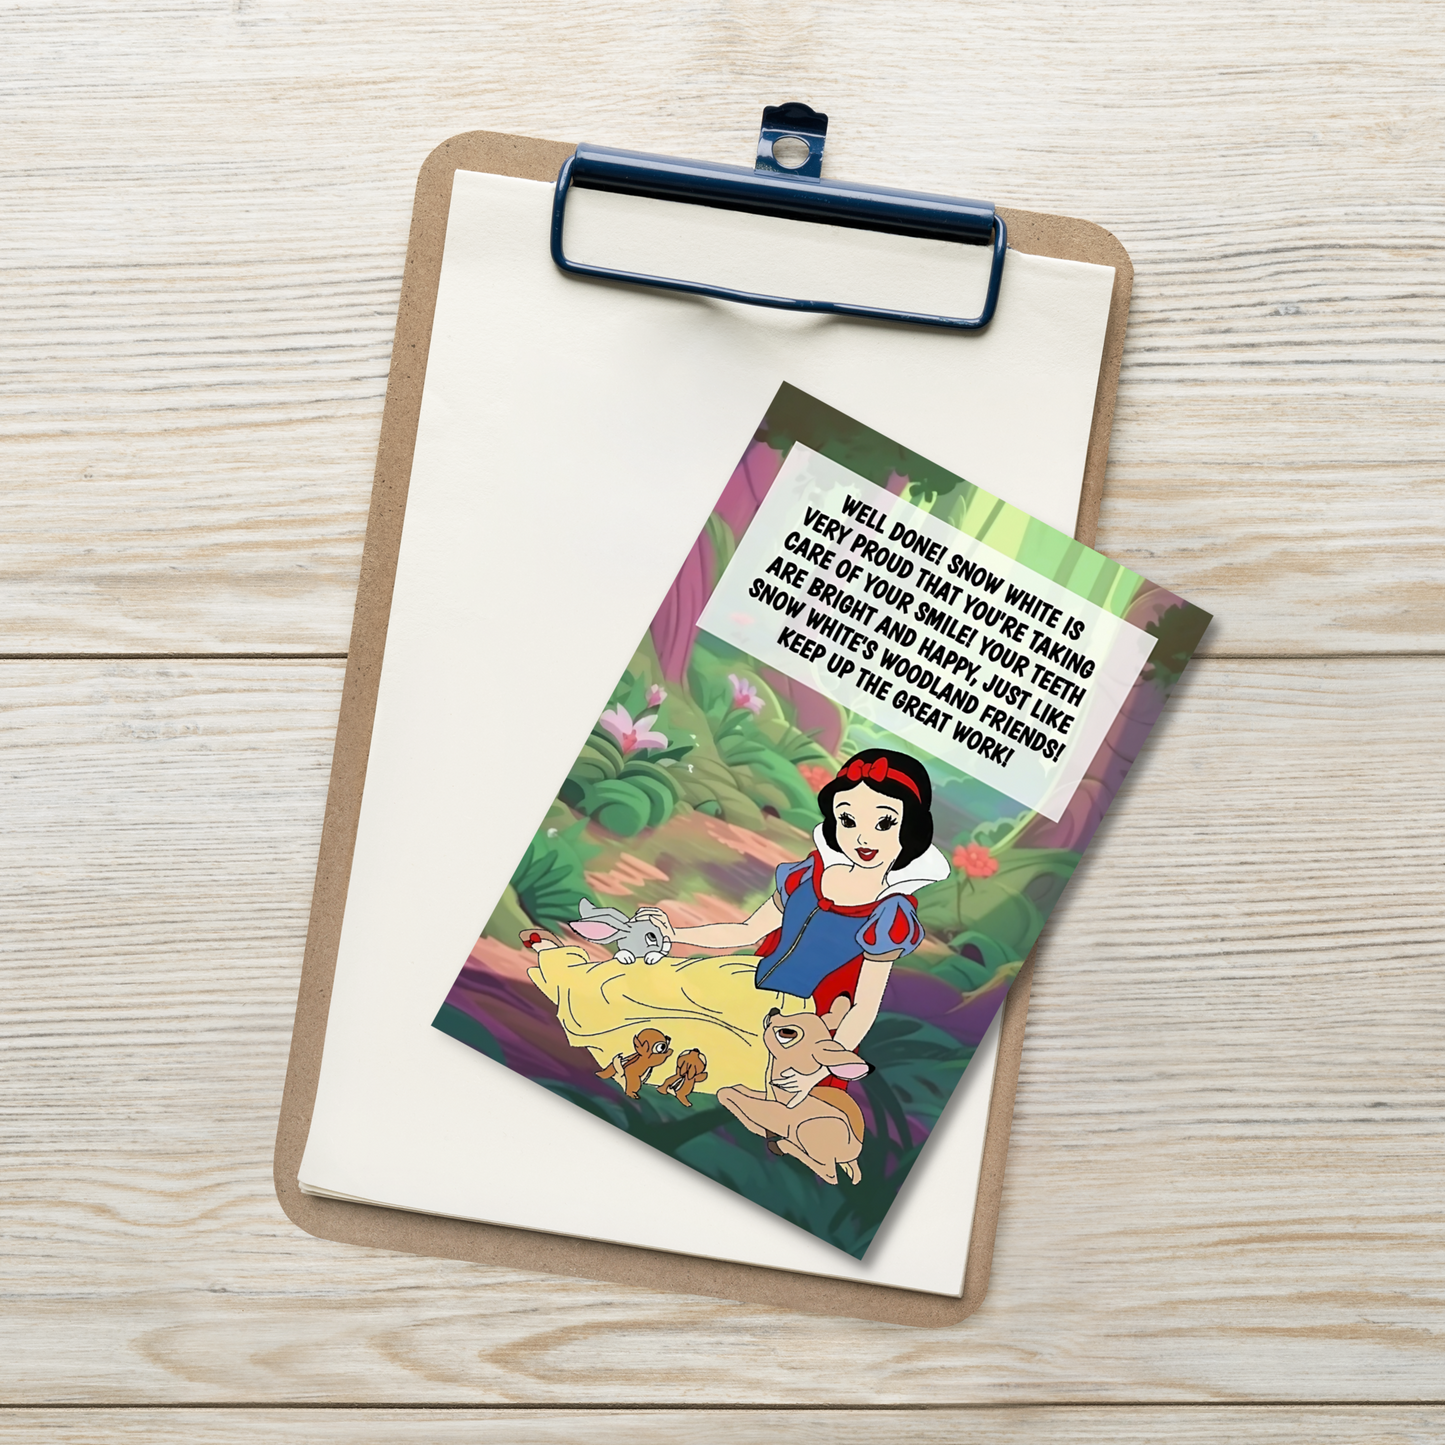 Snow White | Dental Motivational & Reward Cards- Well Done! Snow White Is Very Proud That You're Taking Care Of Your Smile!